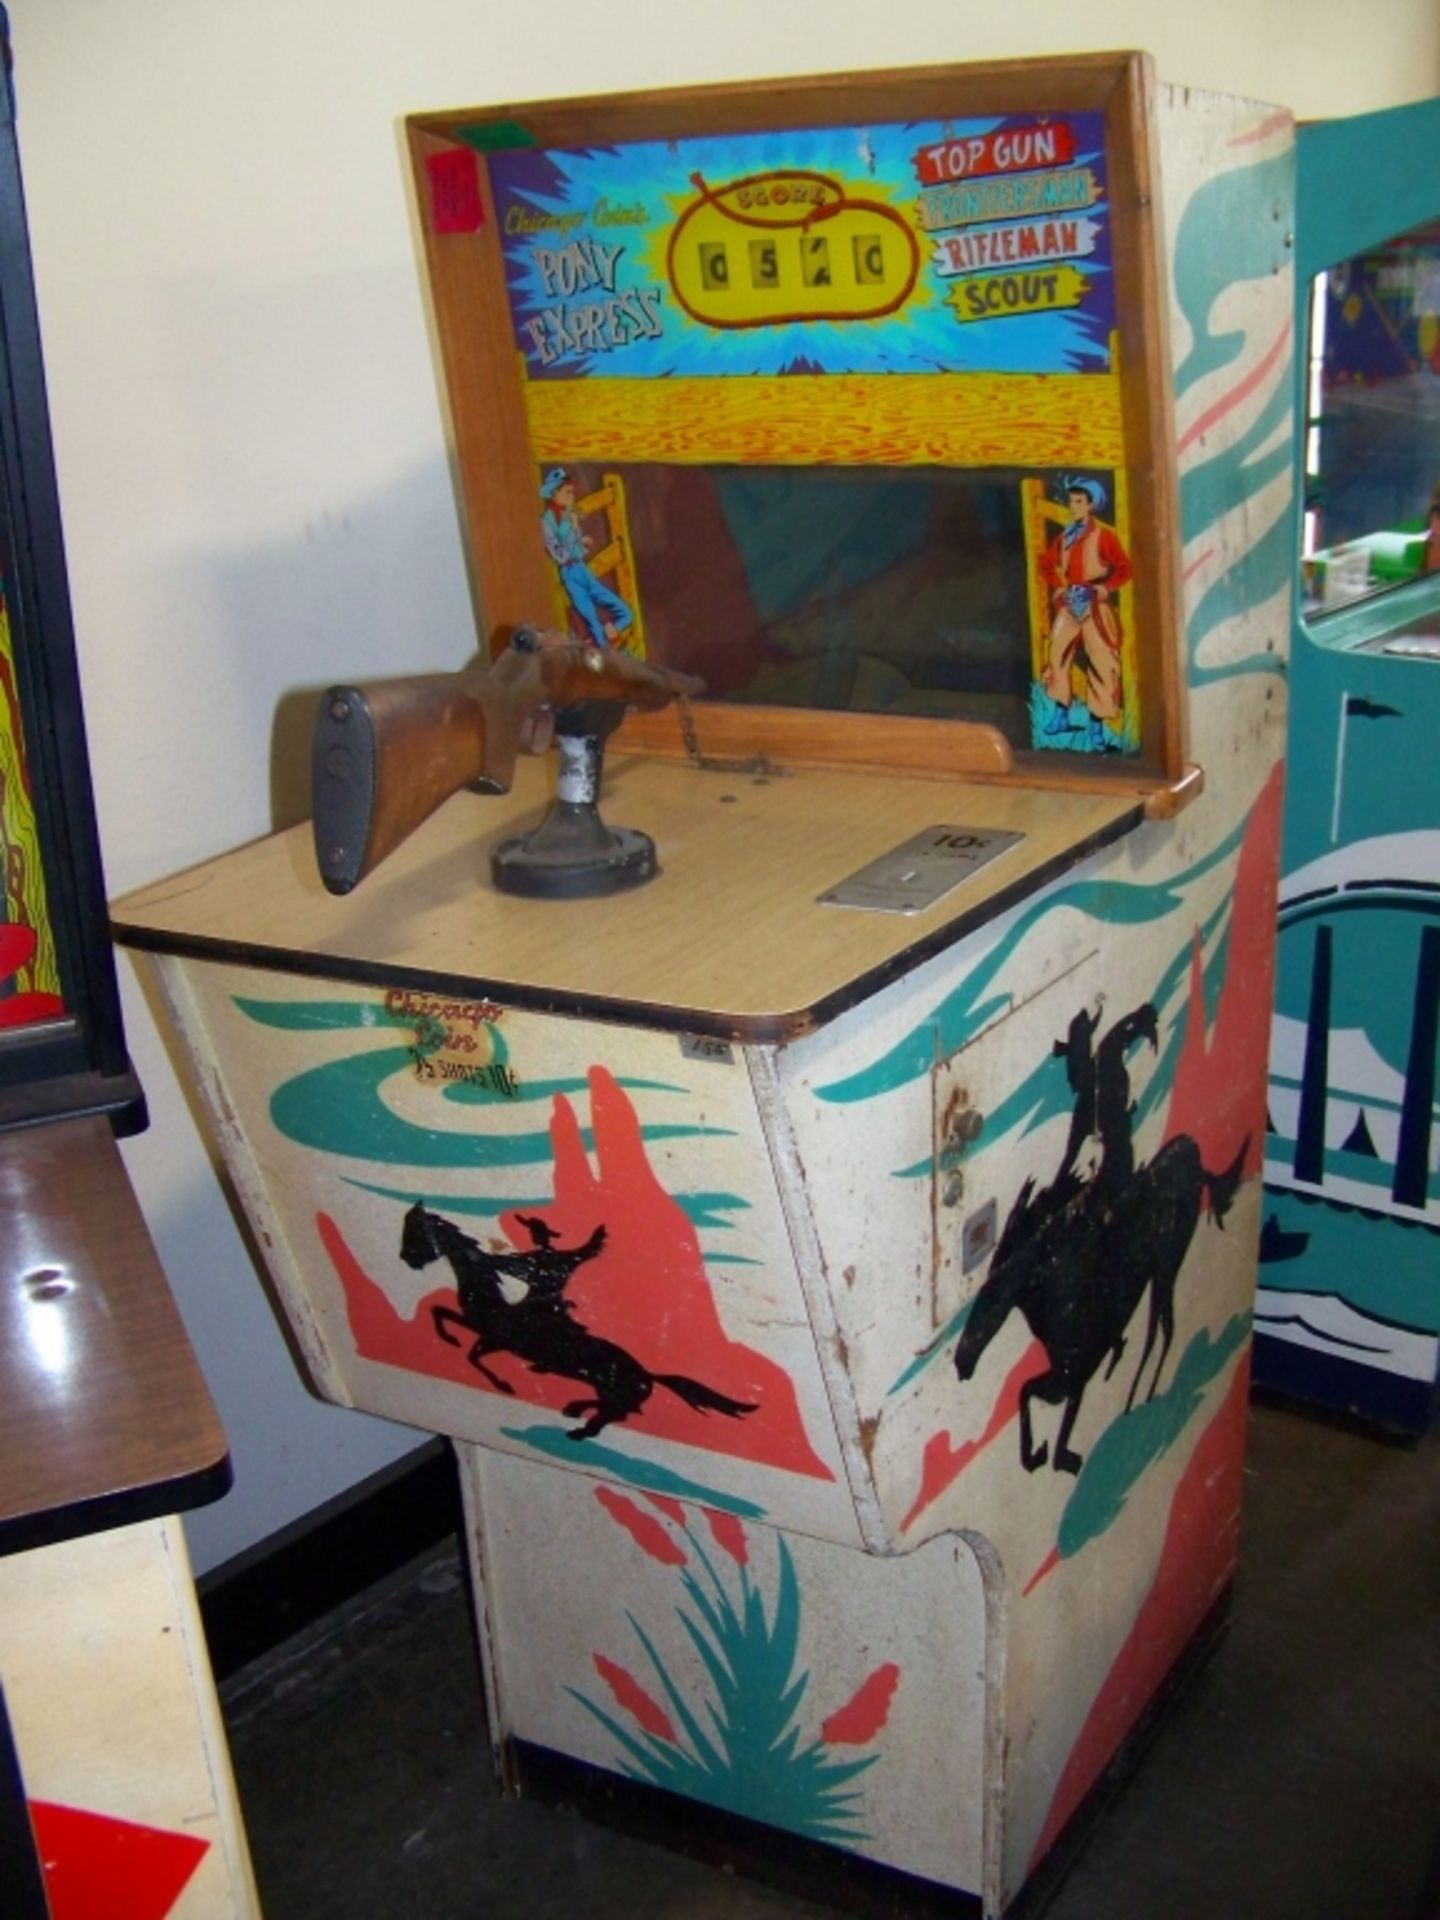 1960 CHICAGO COIN'S PONY EXPRESS RIFLE ARCADE GAME